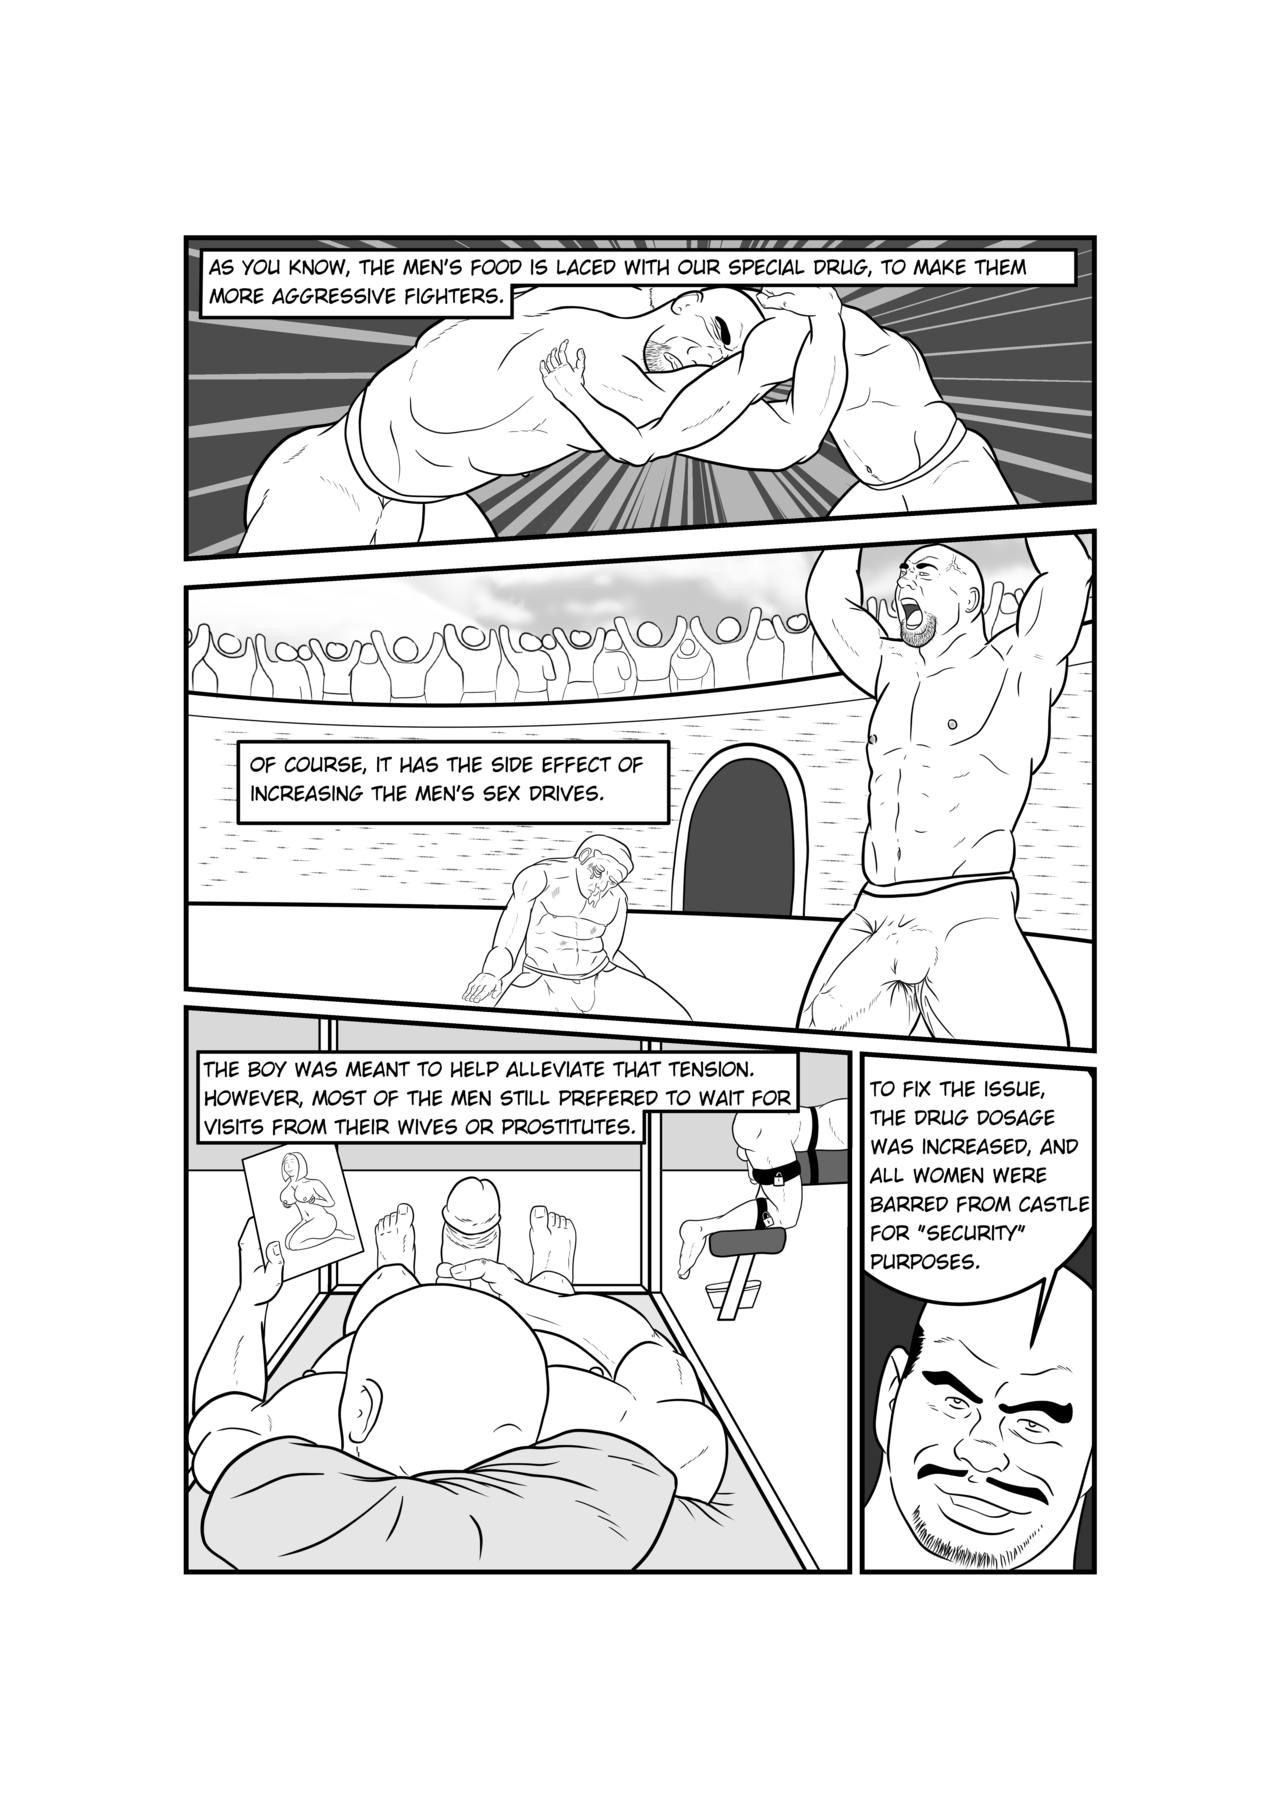 Closeups Father and Son in Hell - Unauthorized Fan Comic - Original Punishment - Page 3